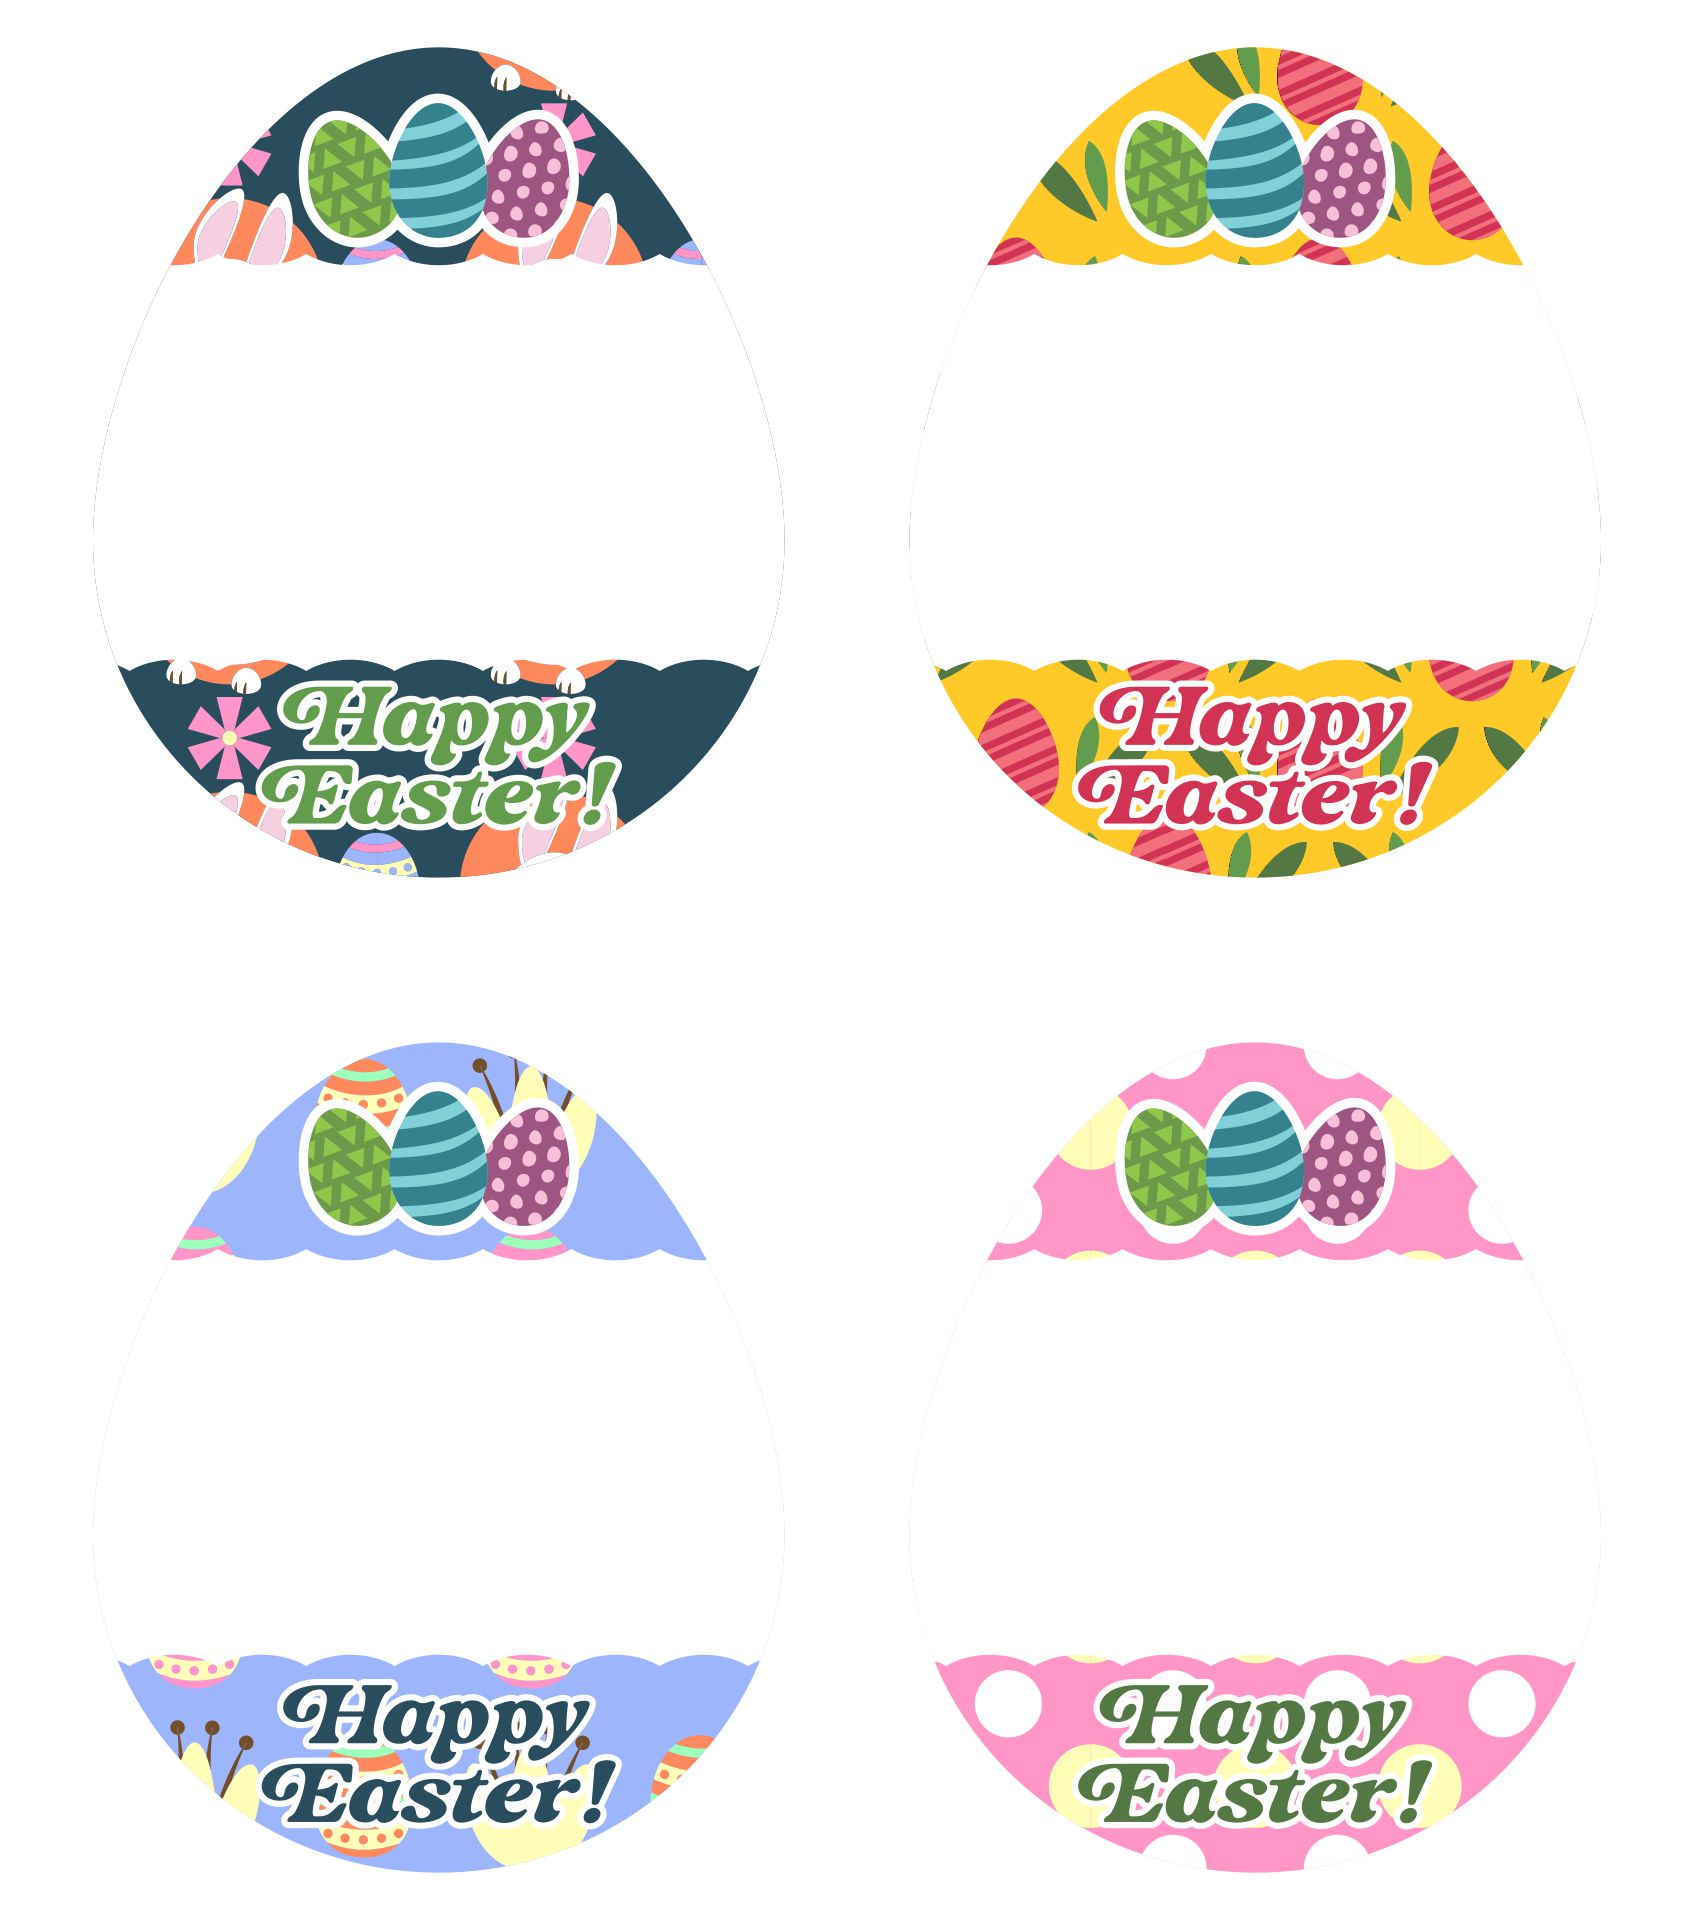 6 Best Images of Create Free Printable Easter Name Tag Free Printable